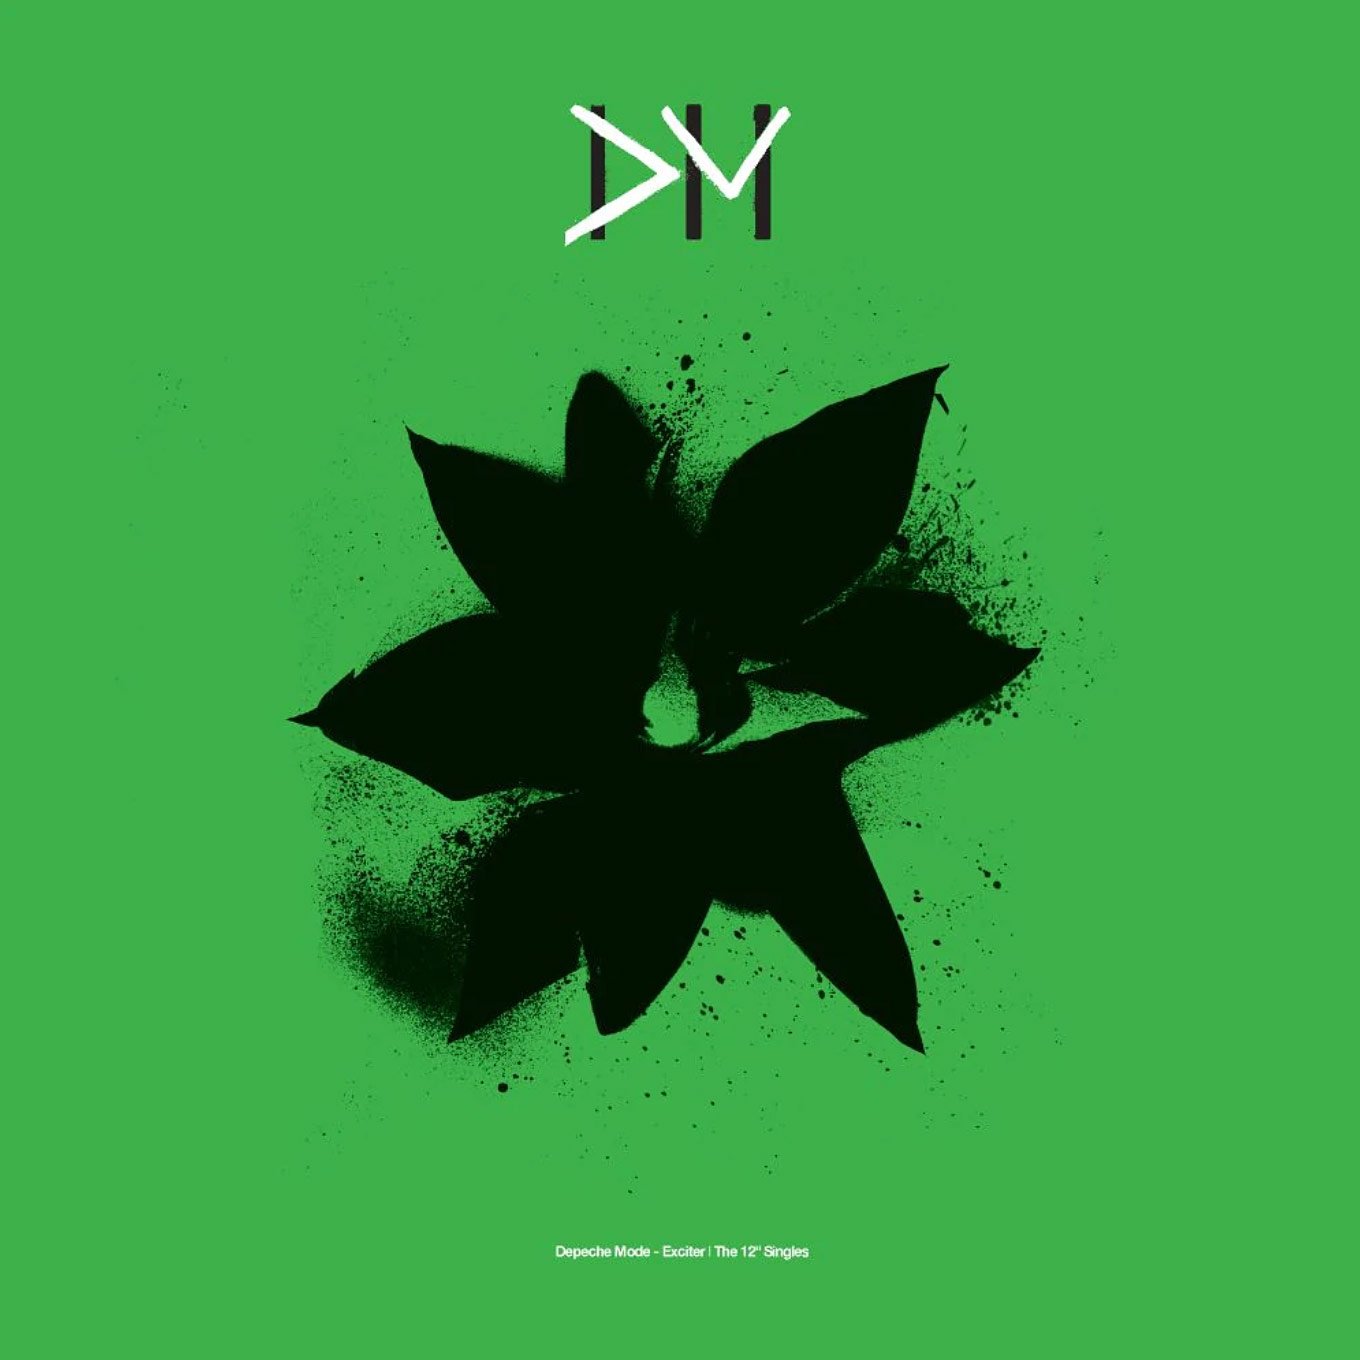 Depeche Mode - "Exciter (The 12" Singles)"